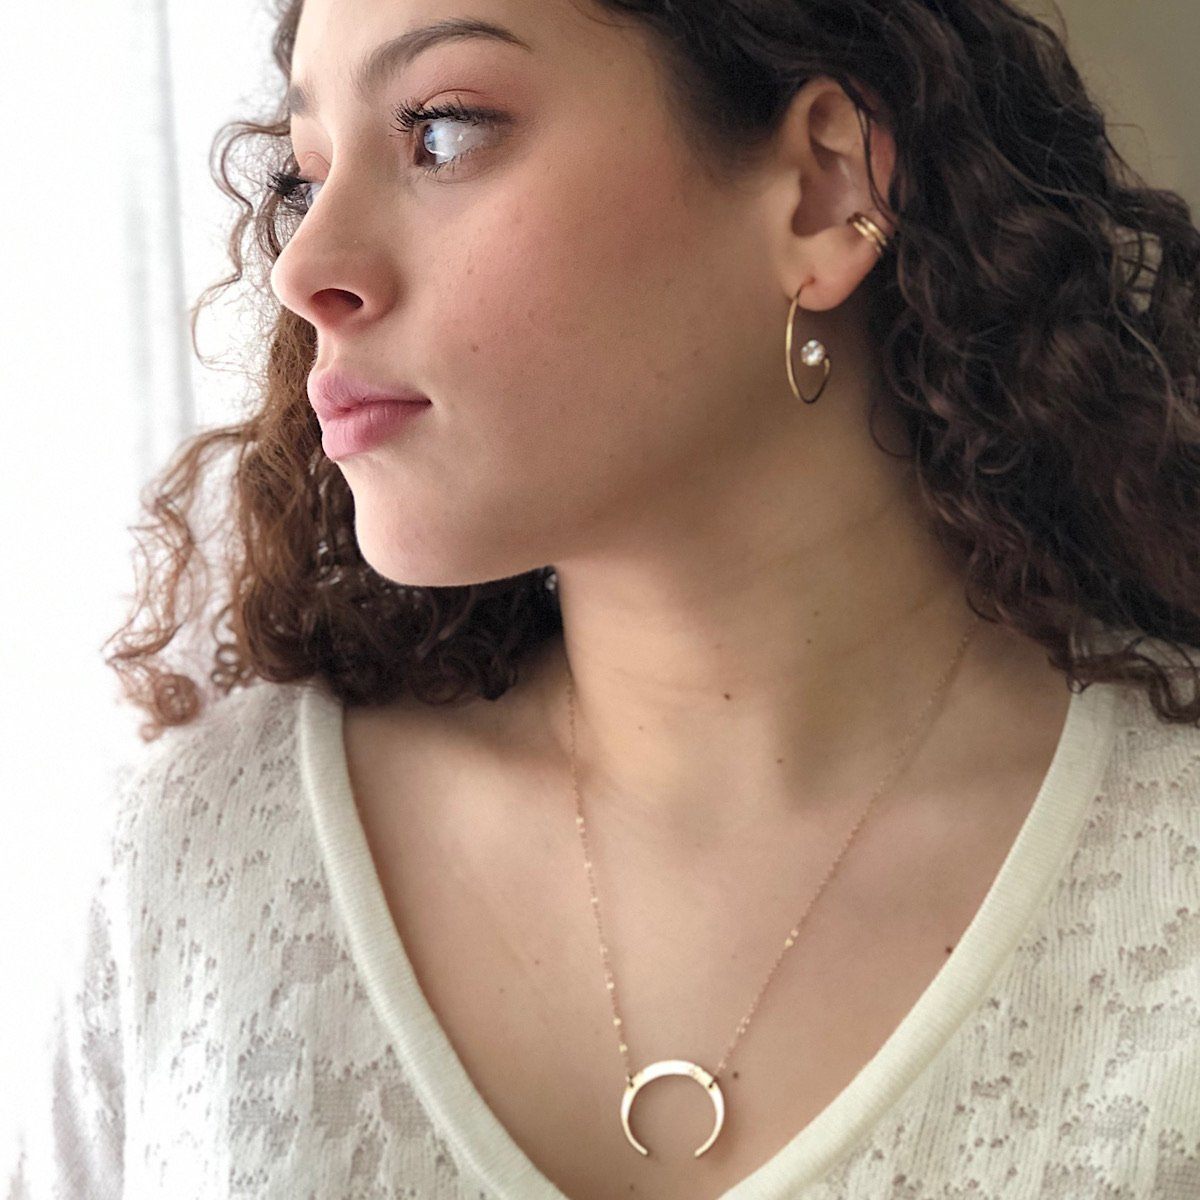 Phoebe New Moon Necklace